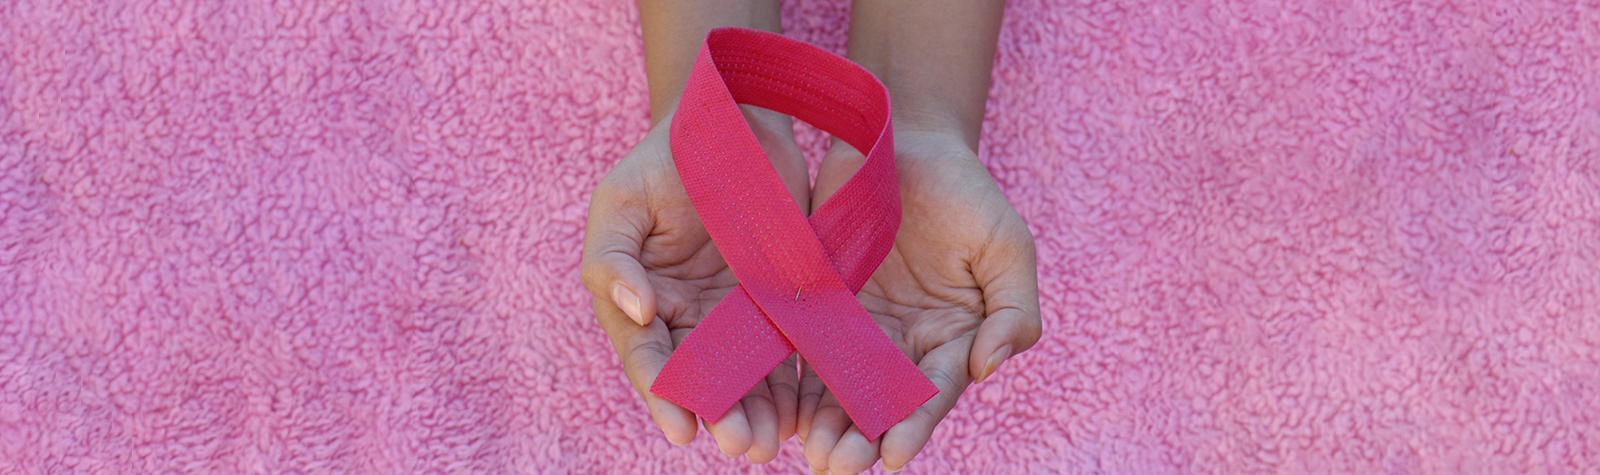 Best ways to prevent breast cancer in young females